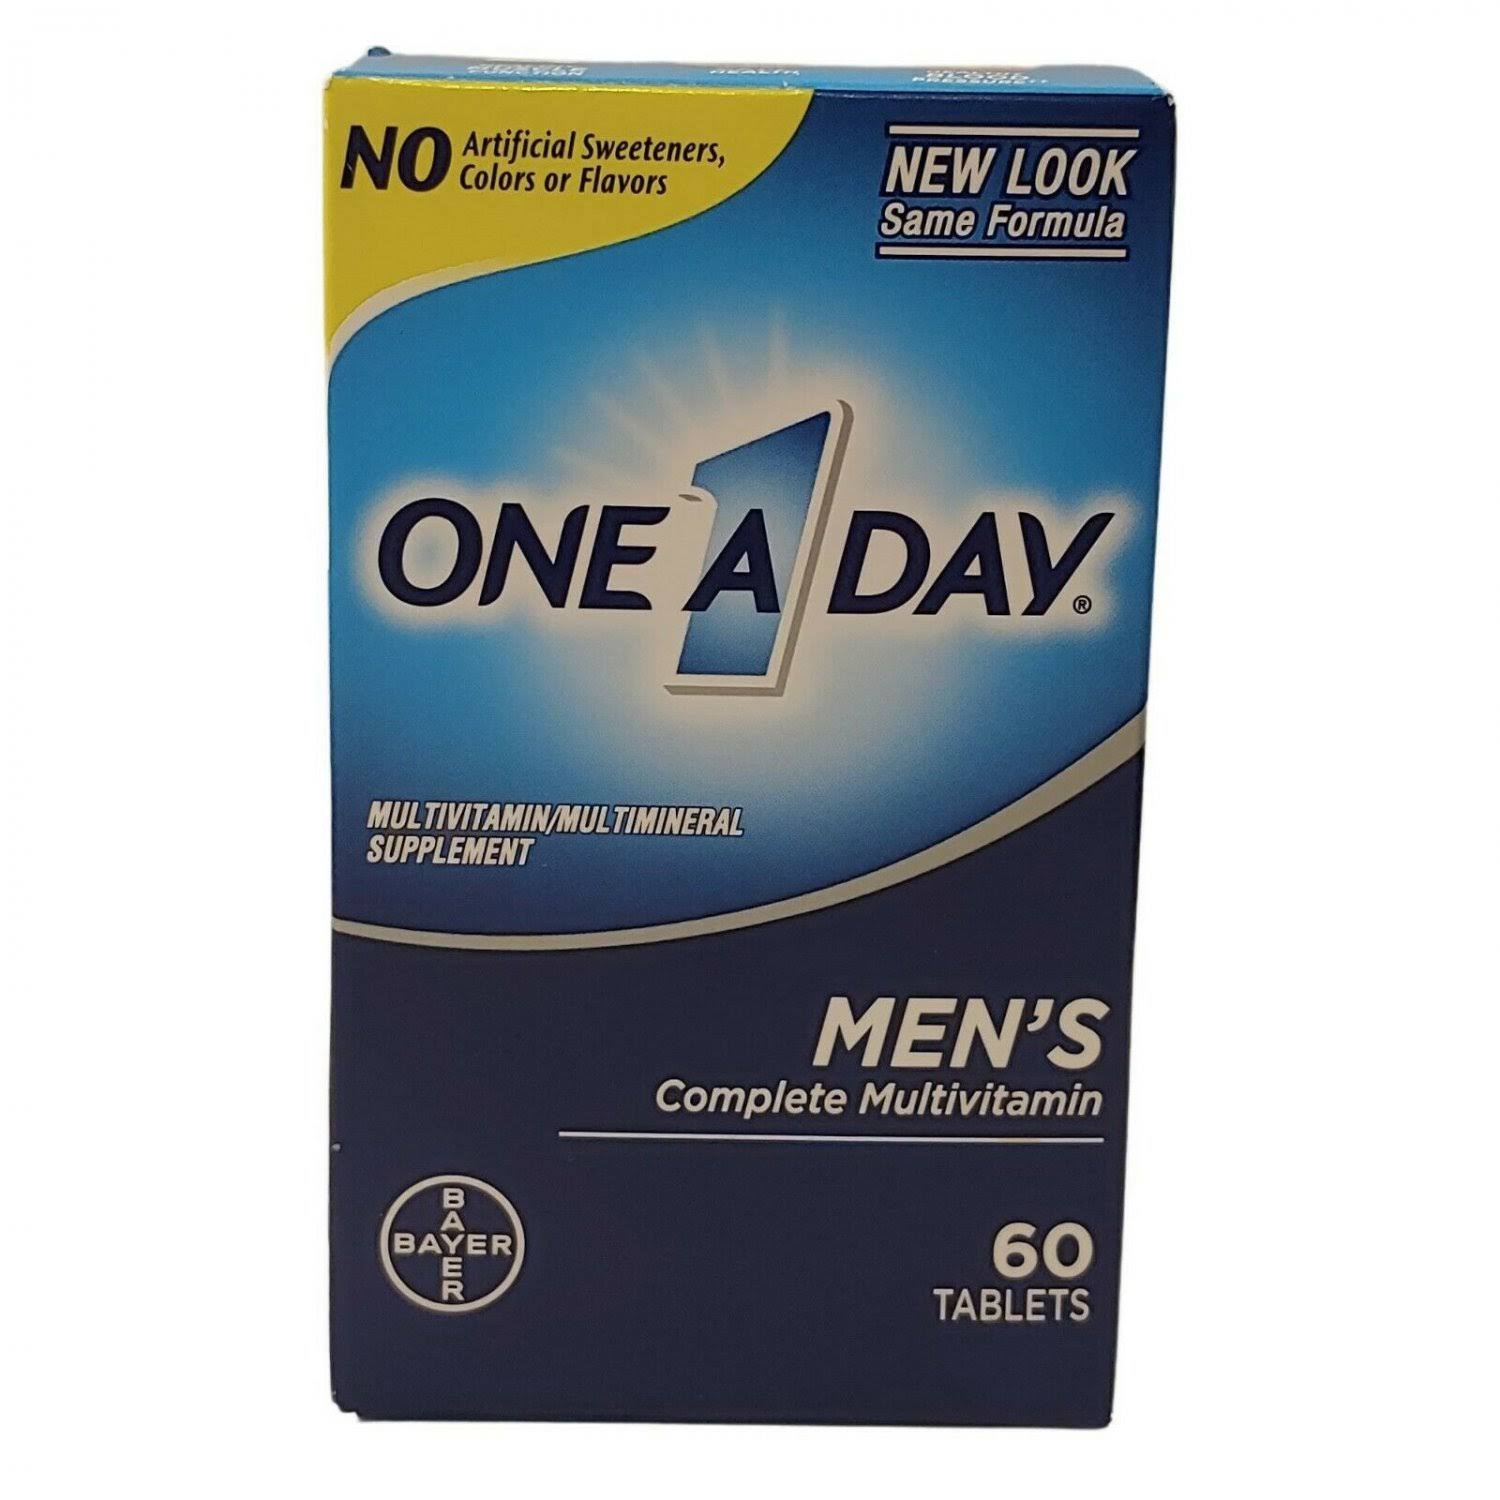 One A Day Men's Complete Multivitamin/Multimineral Supplement, 60 Tab